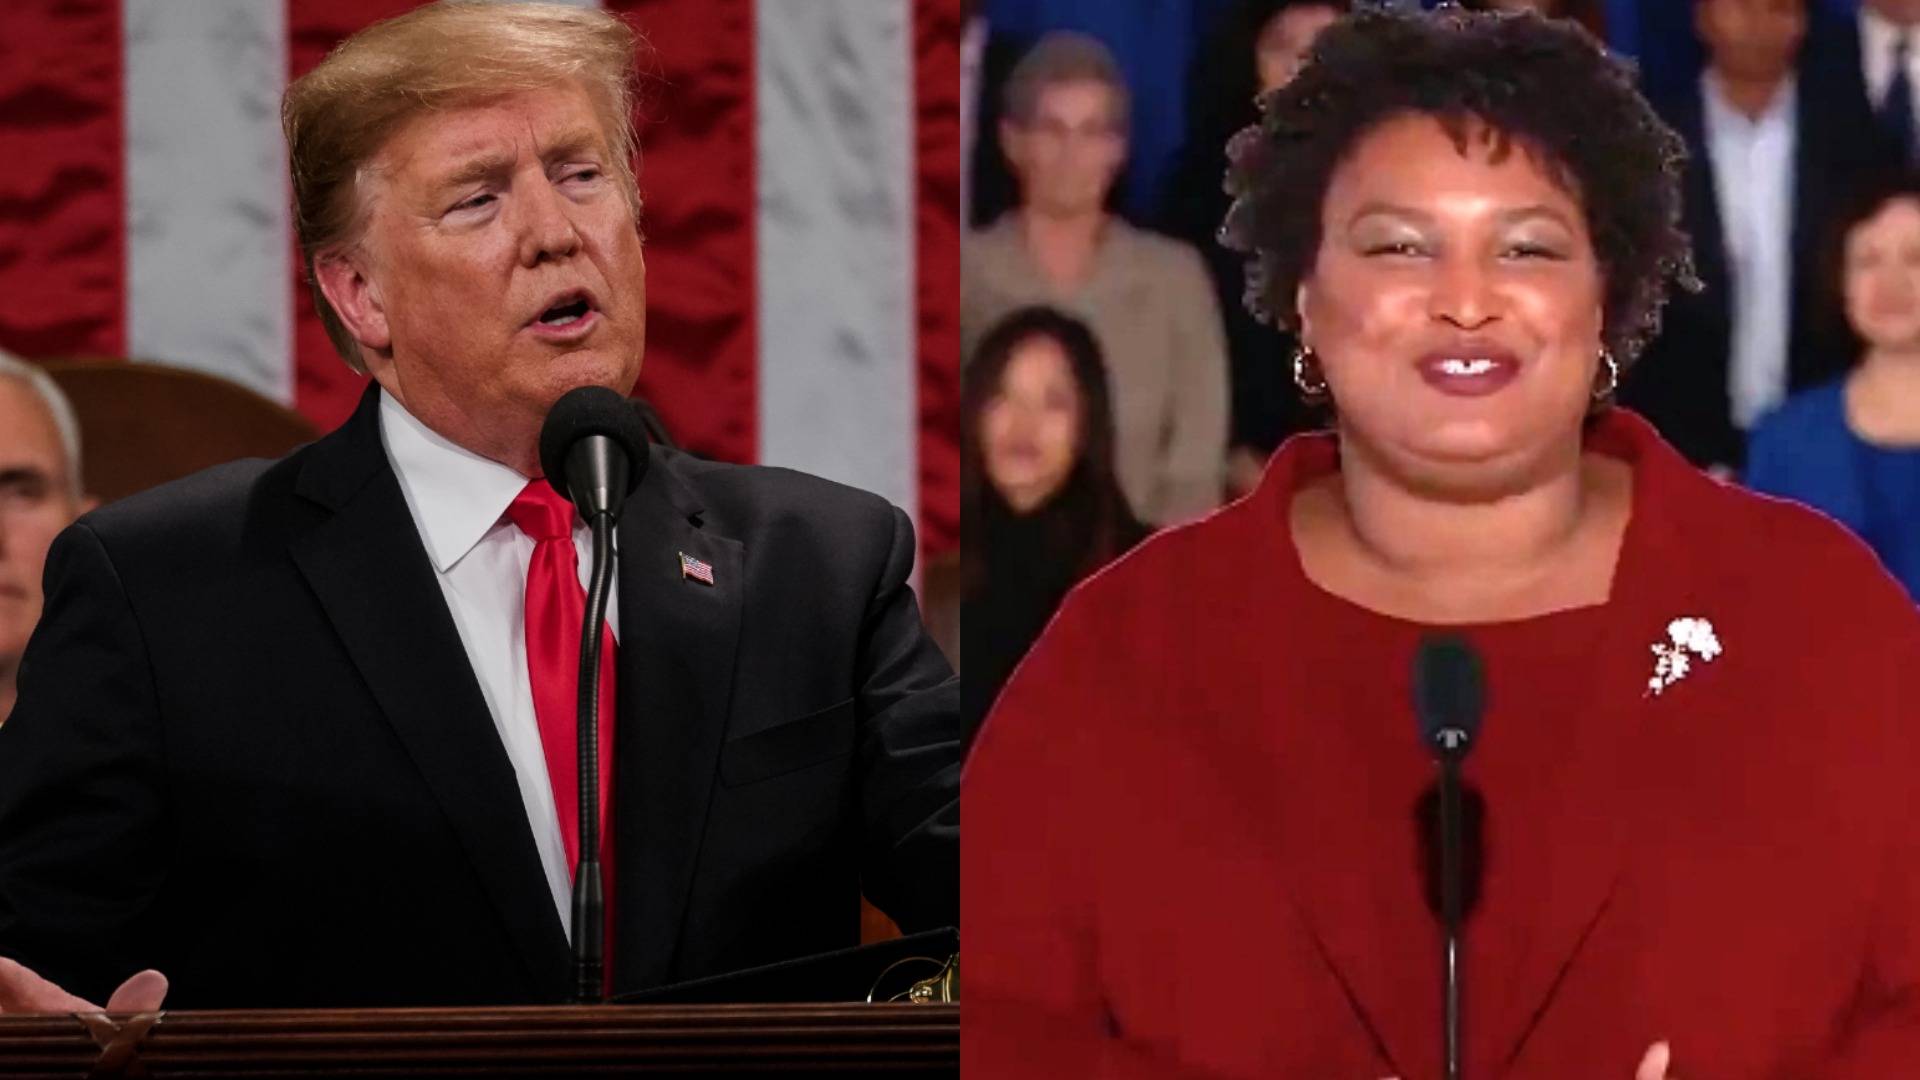 Full Video Of Donald Trump’s State Of The Union Address And Stacey